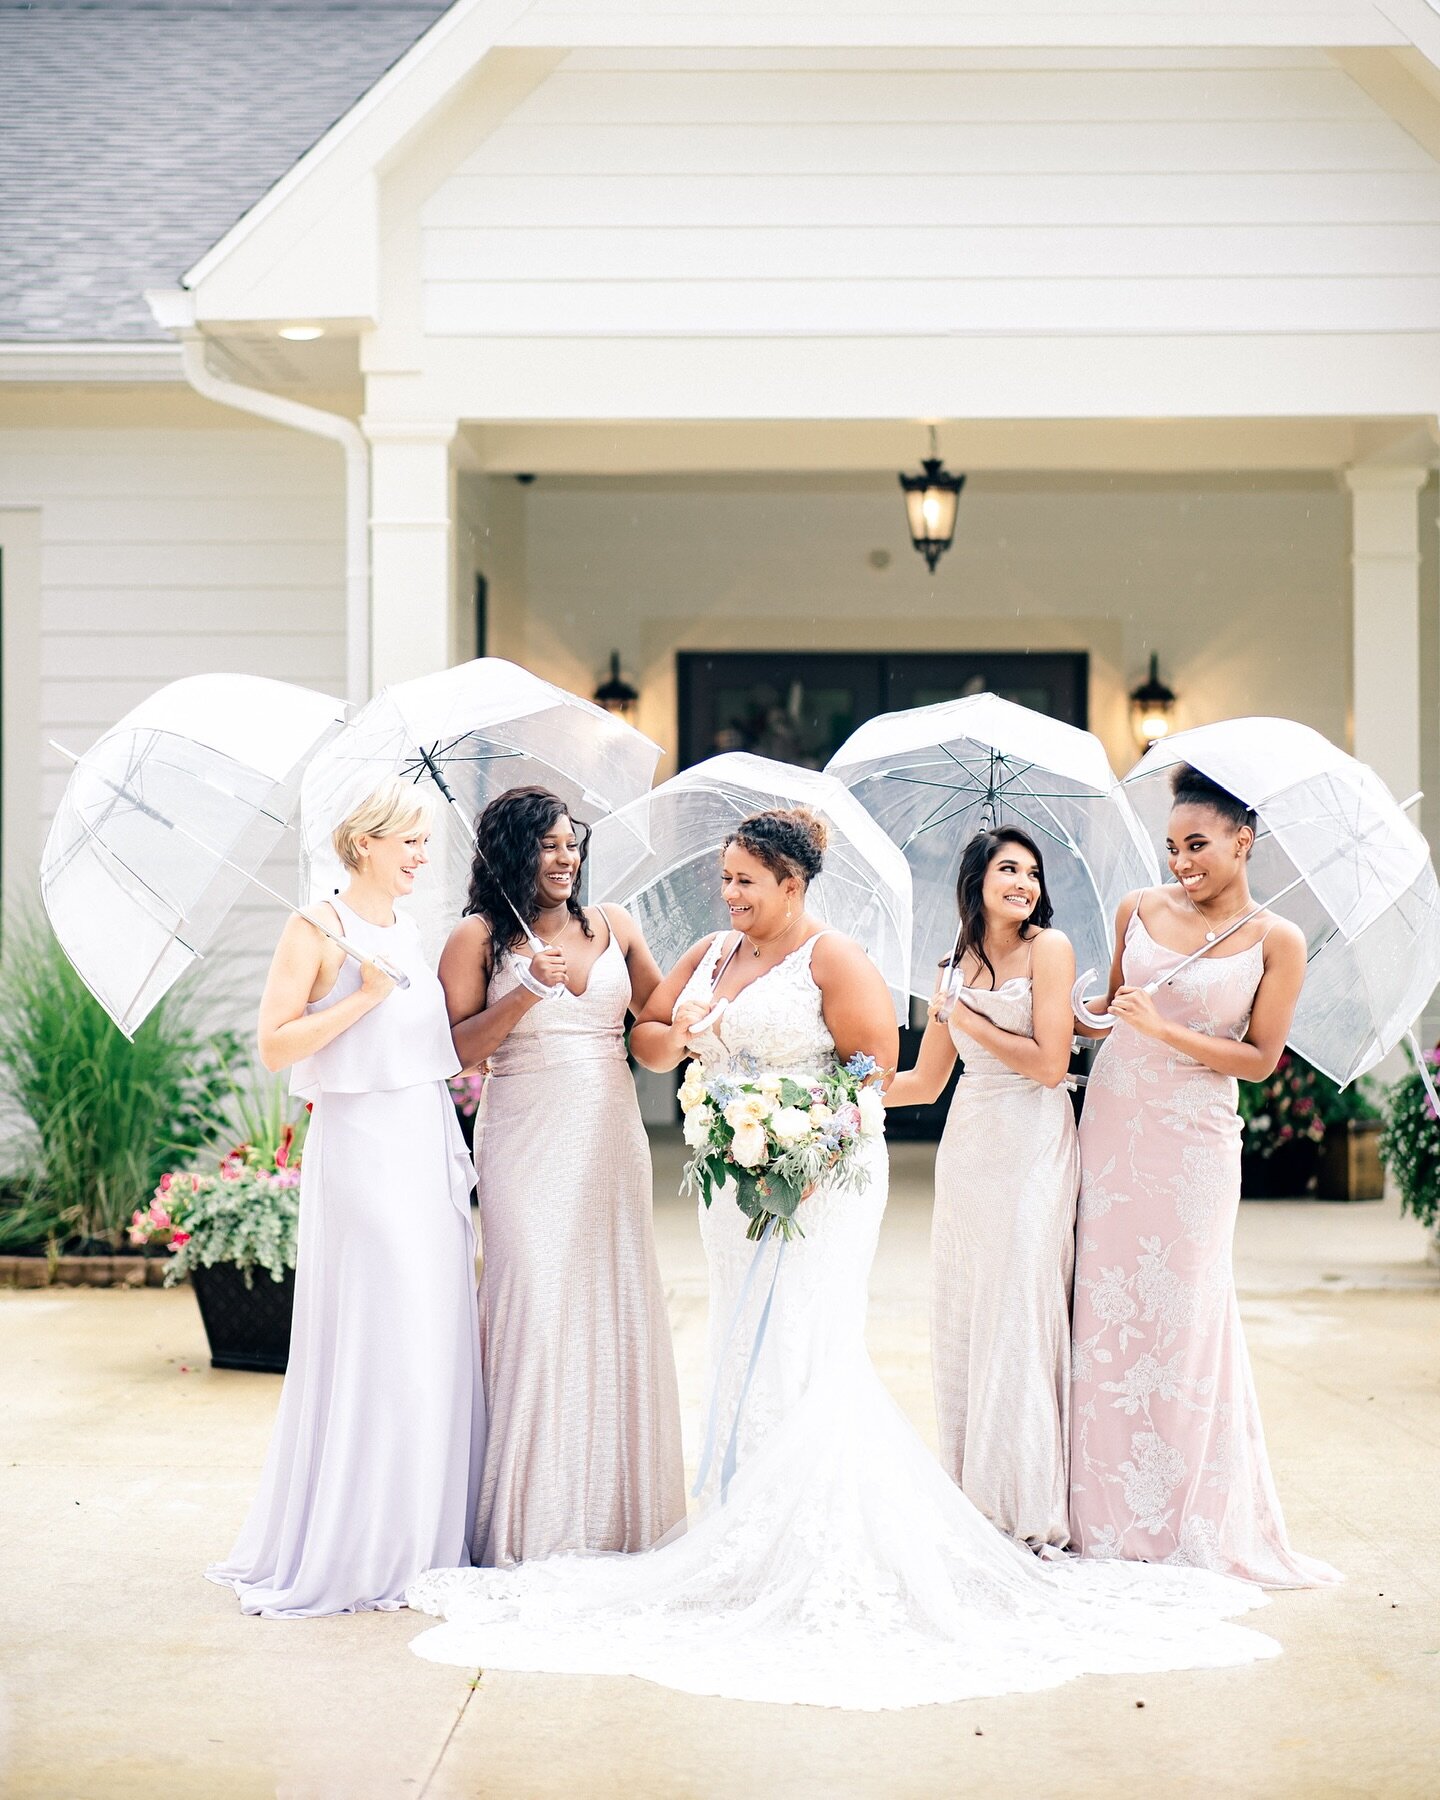 A little rain won&rsquo;t stop the fun here at White Chateau! 2024 brides, DM us today to explore remaining availability!